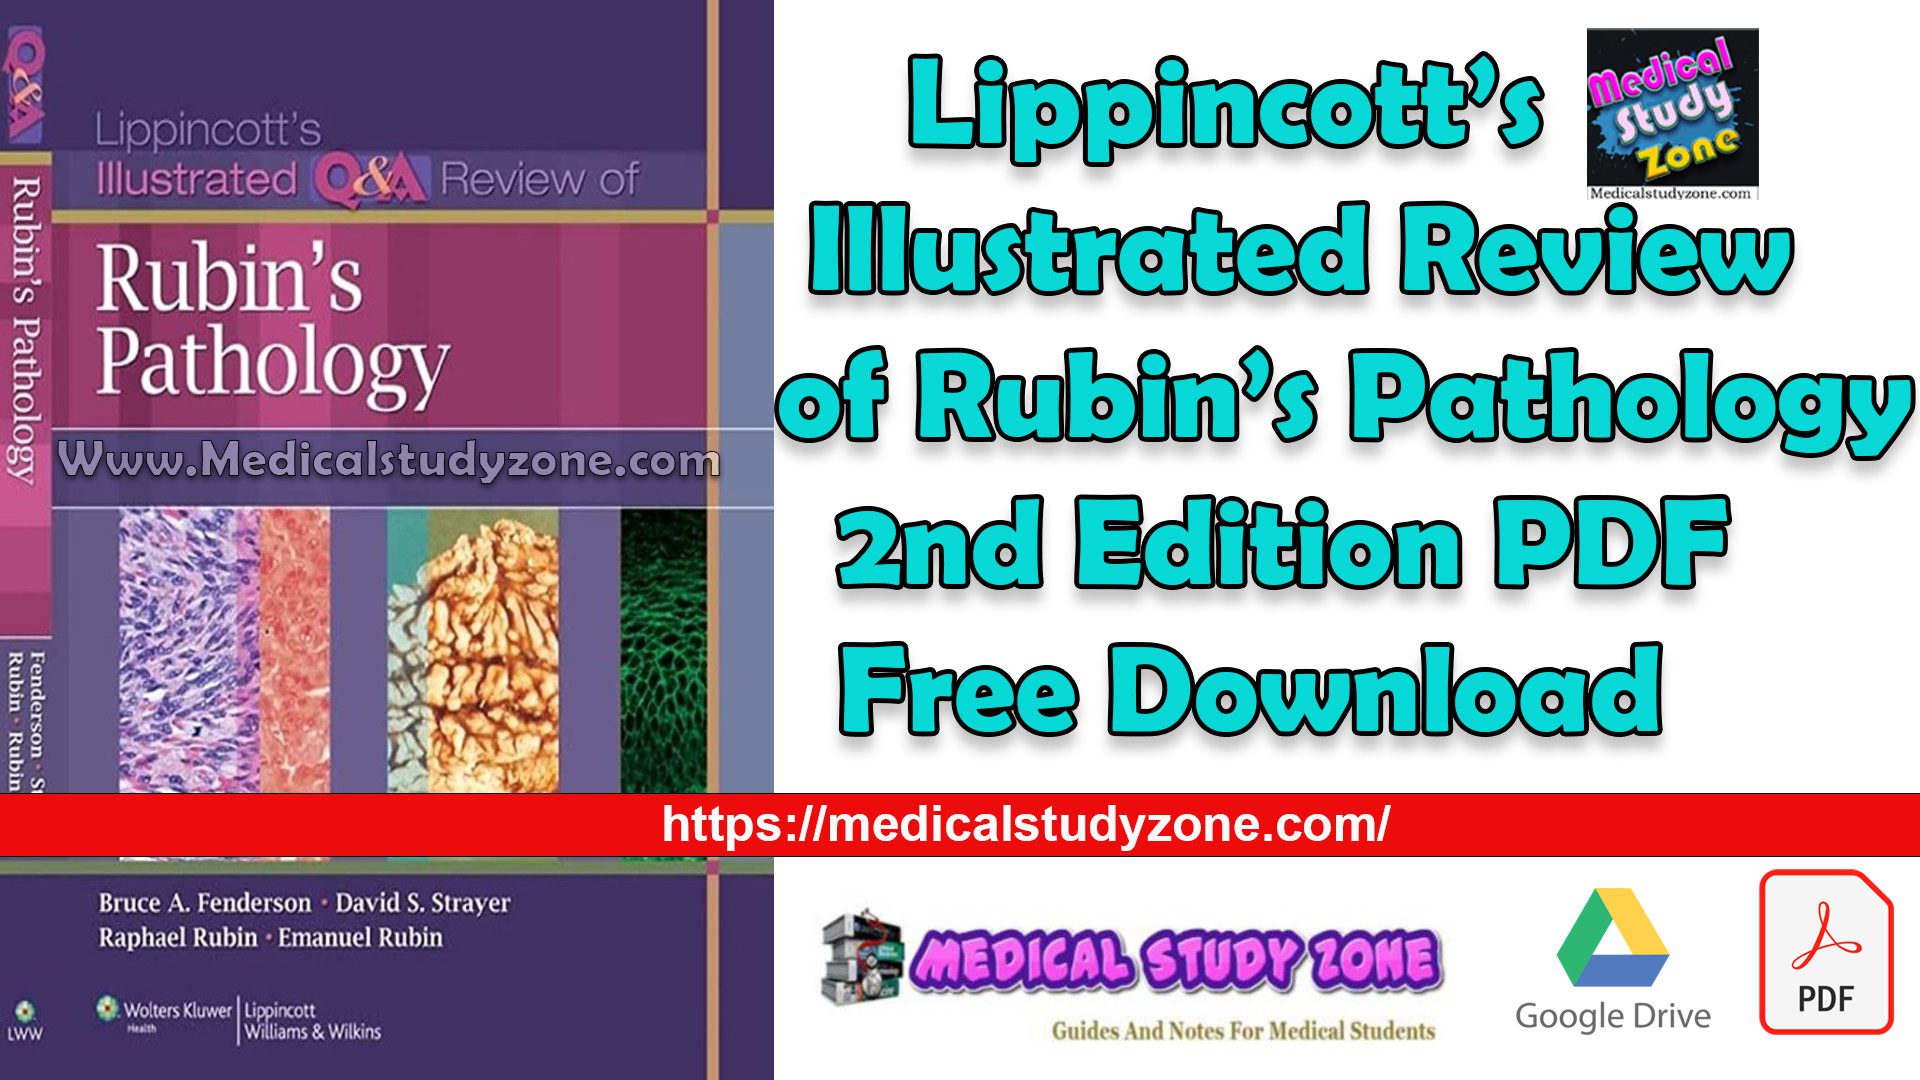 Lippincott’s Illustrated Review of Rubin’s Pathology 2nd Edition PDF Free Download